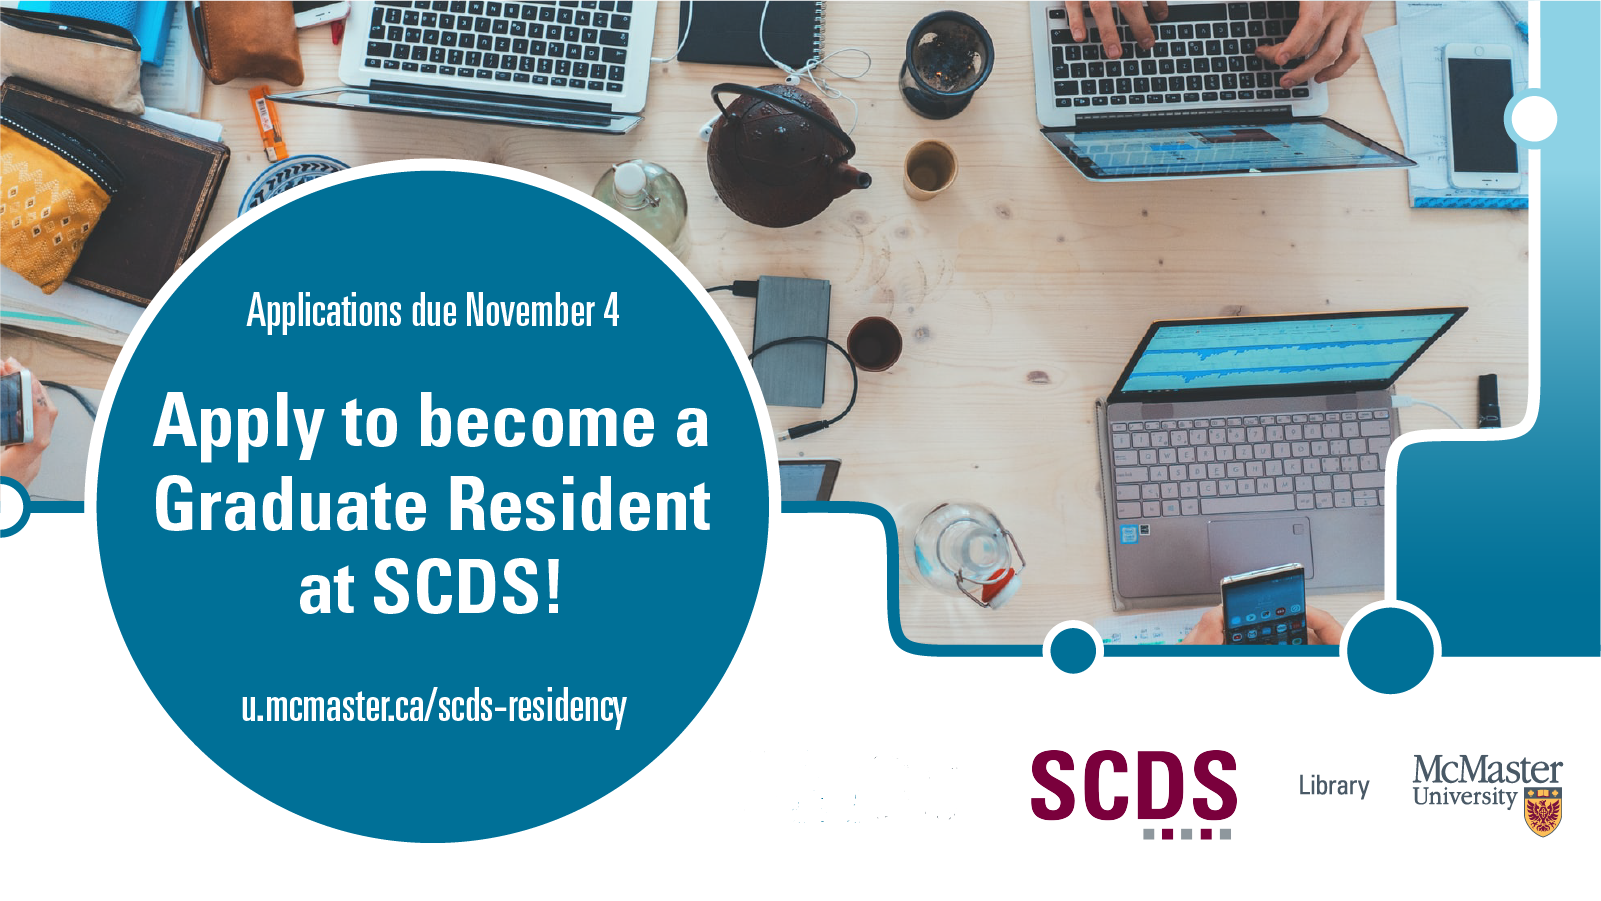 Apply to become a graduate resident at SCDS. Deadline to apply: November 4